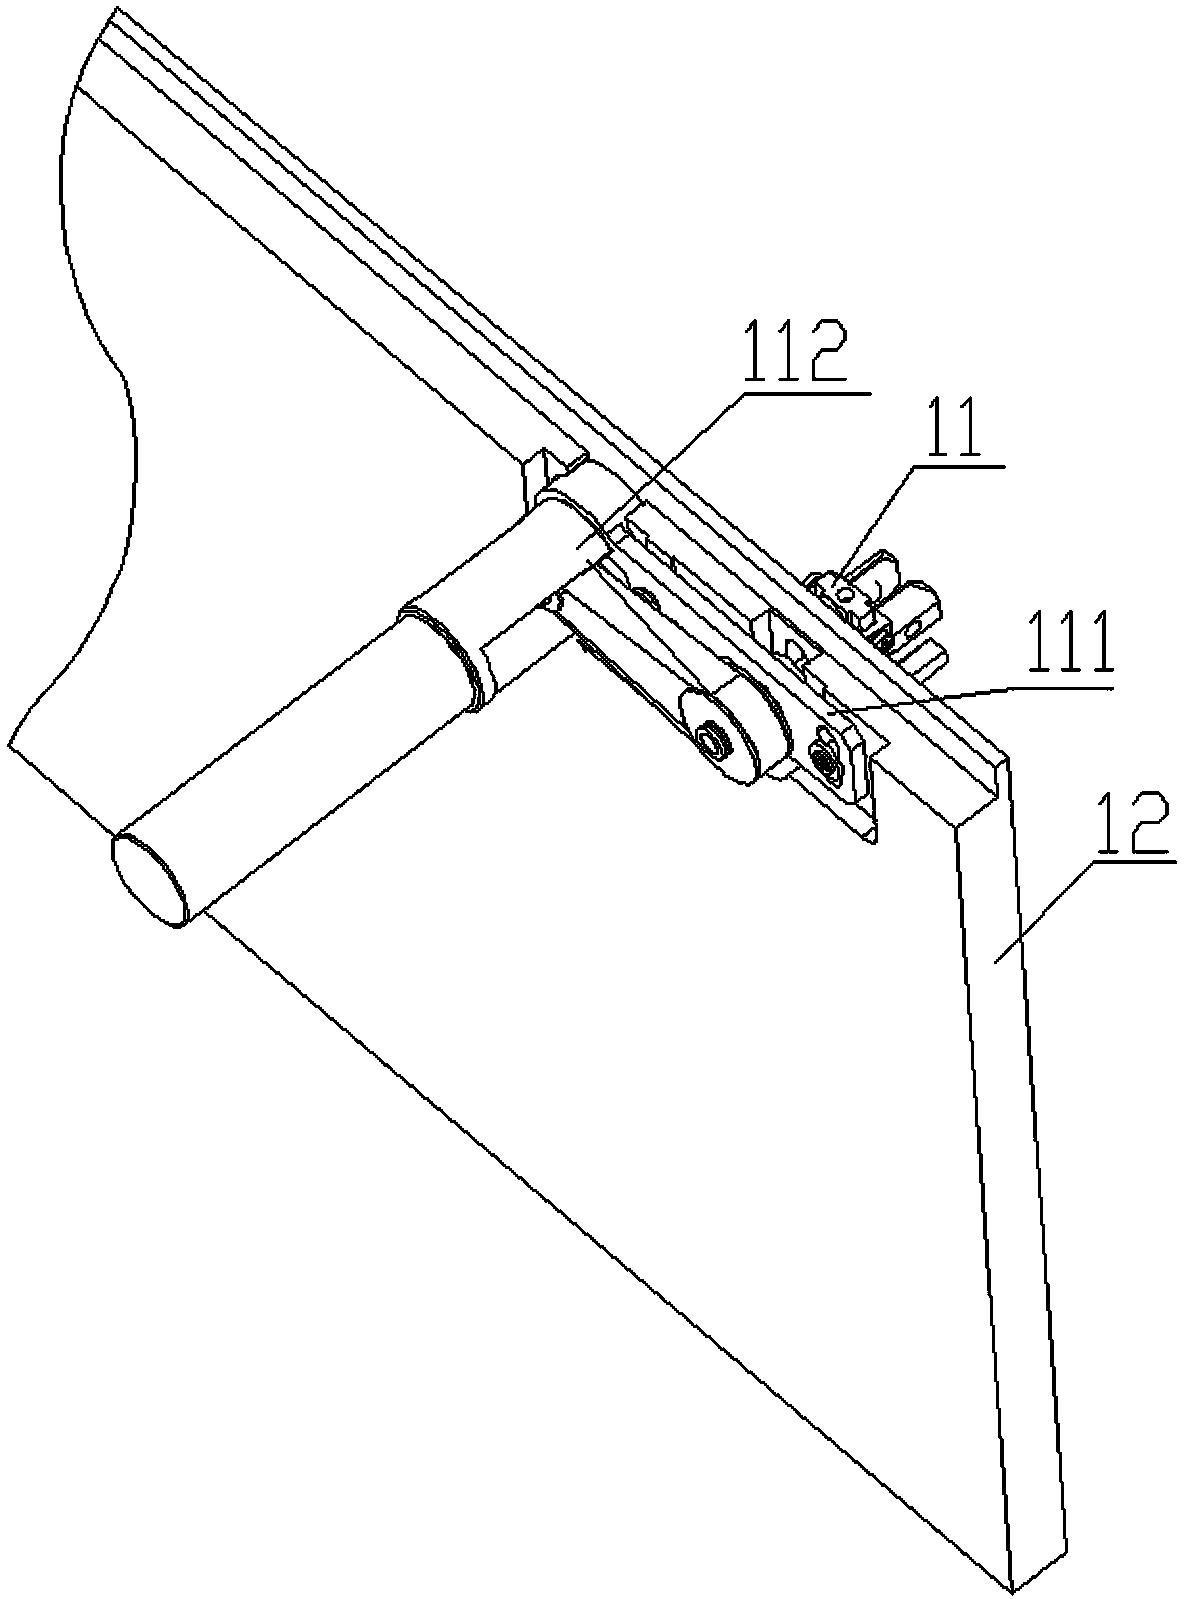 Blood component separator and automatic stopper breaking mechanism thereof